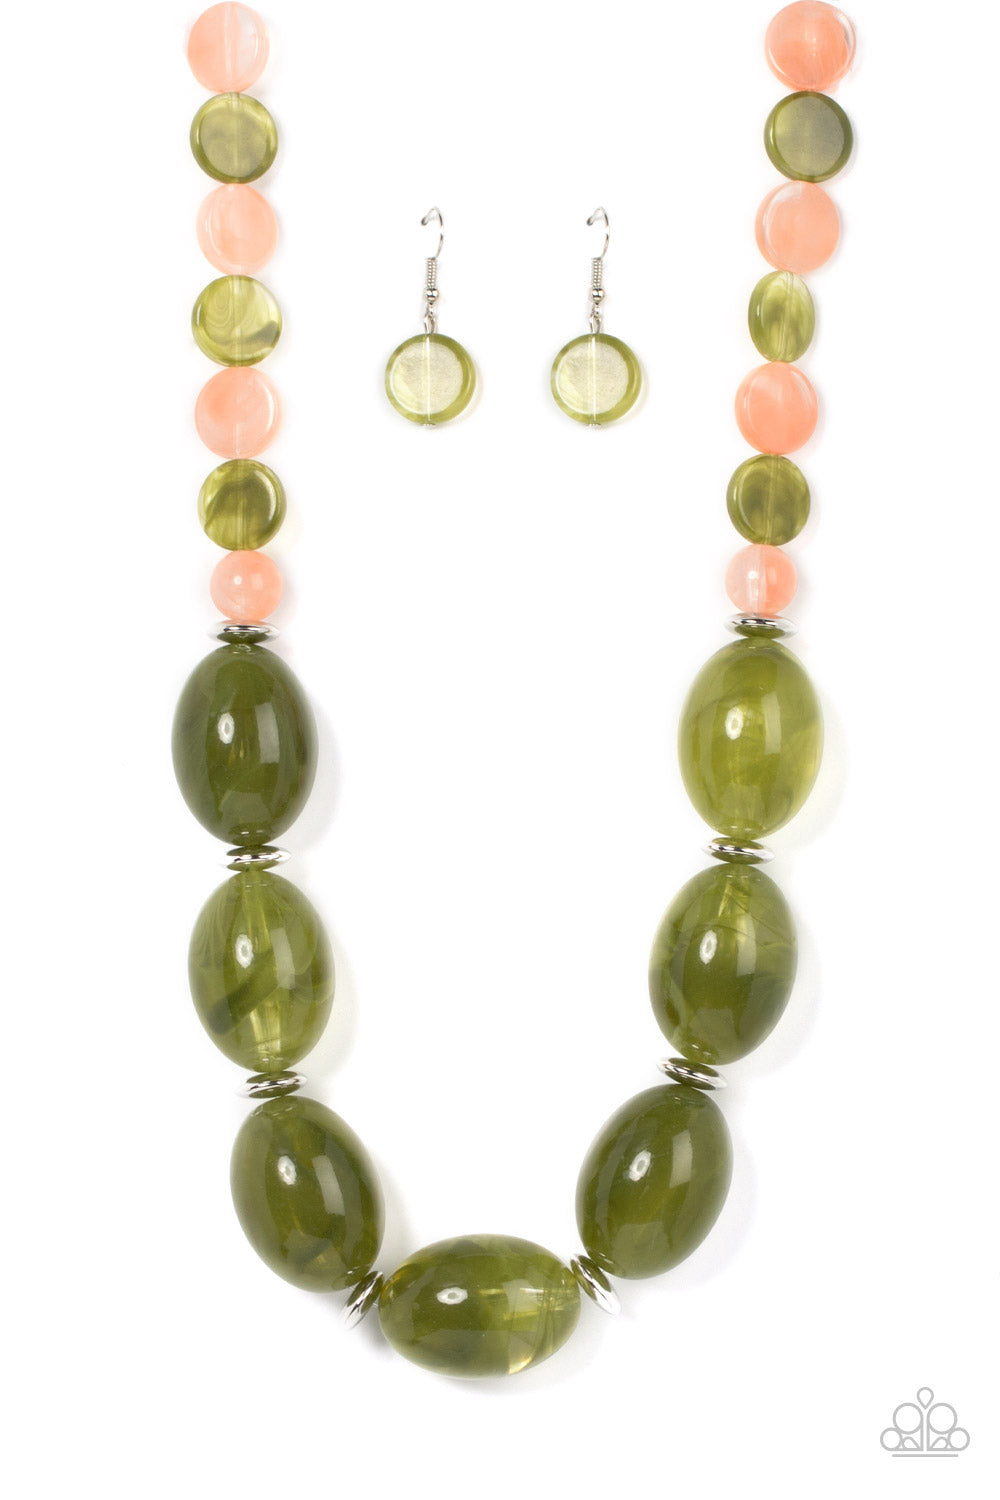 Paparazzi Accessories - Belle of the Beach - Green Necklaces featuring cloudy acrylic finishes, flat Olive Branch and coral discs alternate along an invisible wire, giving way to an oversized collection of cloudy oval Olive Branch beads for an ethereal pop of color below the collar. Features an adjustable clasp closure.  Sold as one individual necklace. Includes one pair of matching earrings.